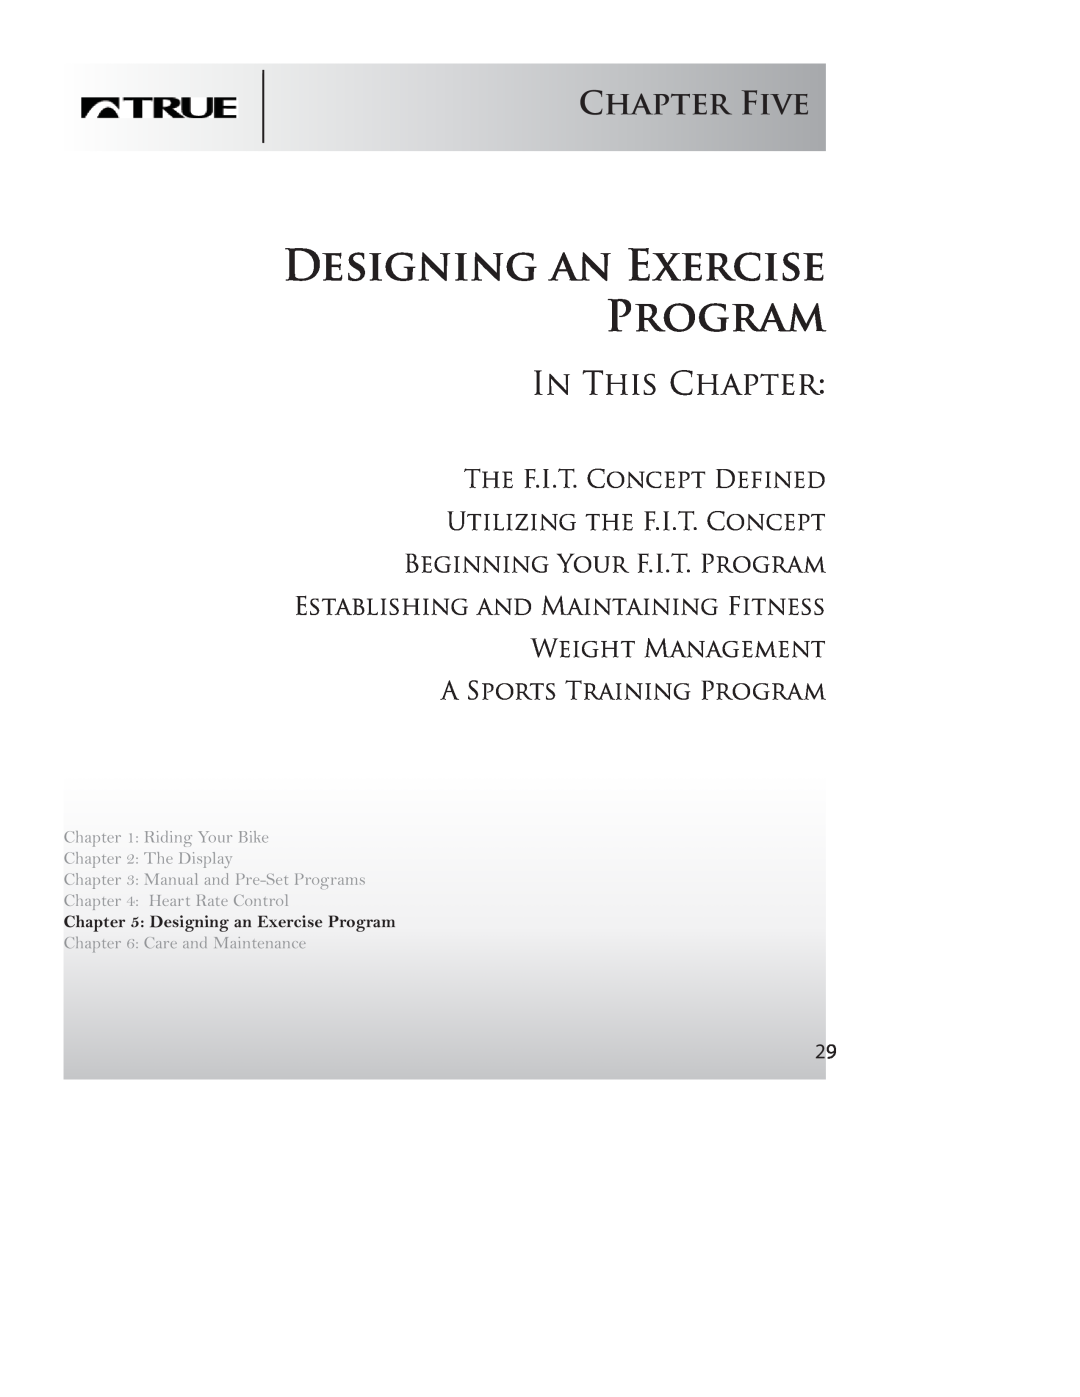 True Fitness P100 Designing an Exercise Program, Chapter Five, The F.I.T. Concept Defined Utilizing the F.I.T. Concept 